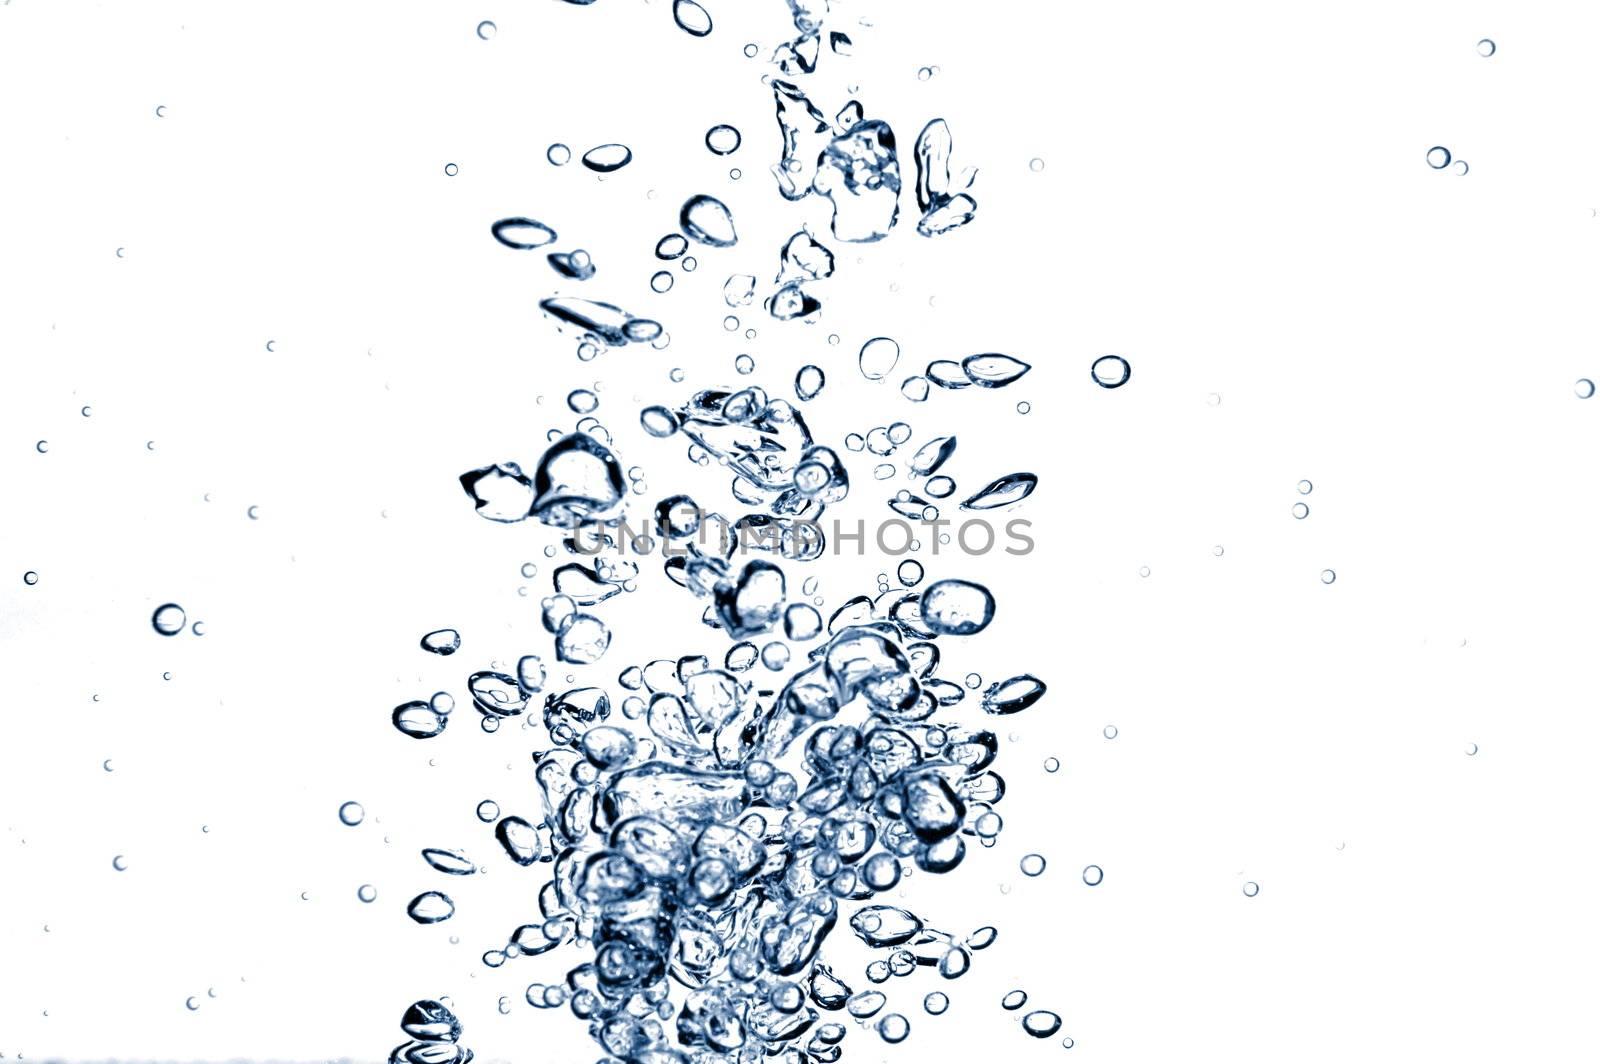 cool water background with bubbles and space for a text message